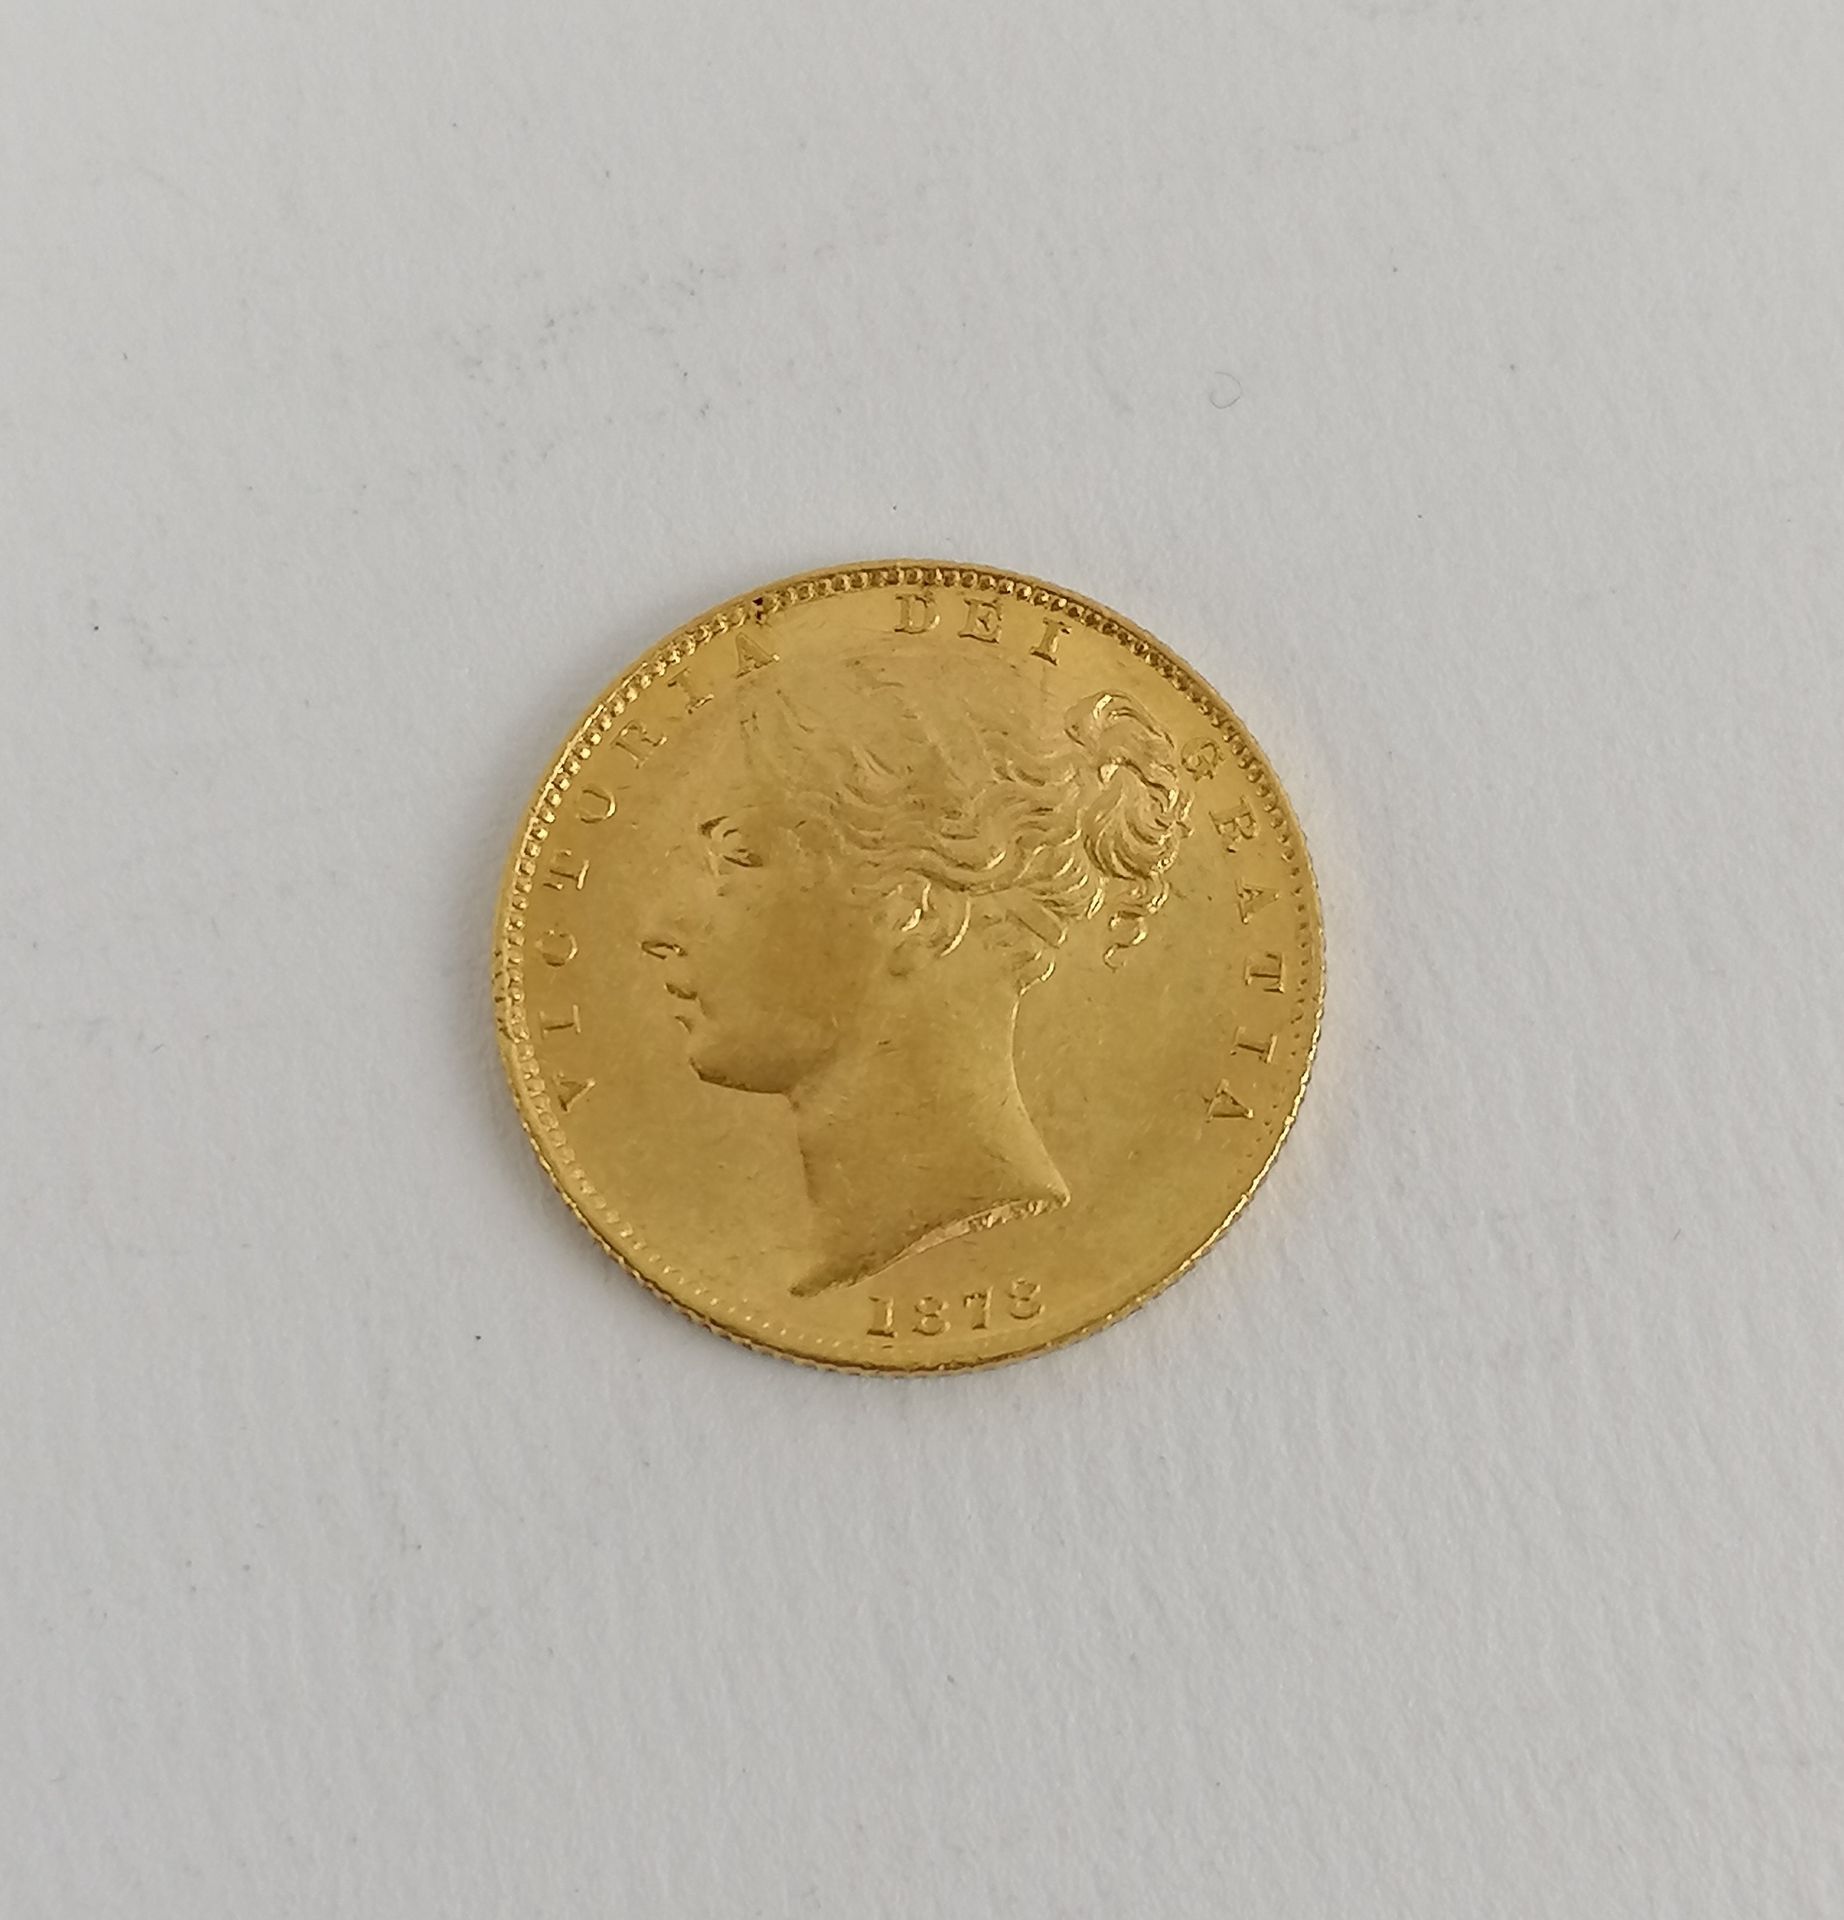 Null A gold coin Souverain Victoria jeune année 1878.
Weight : 8 g